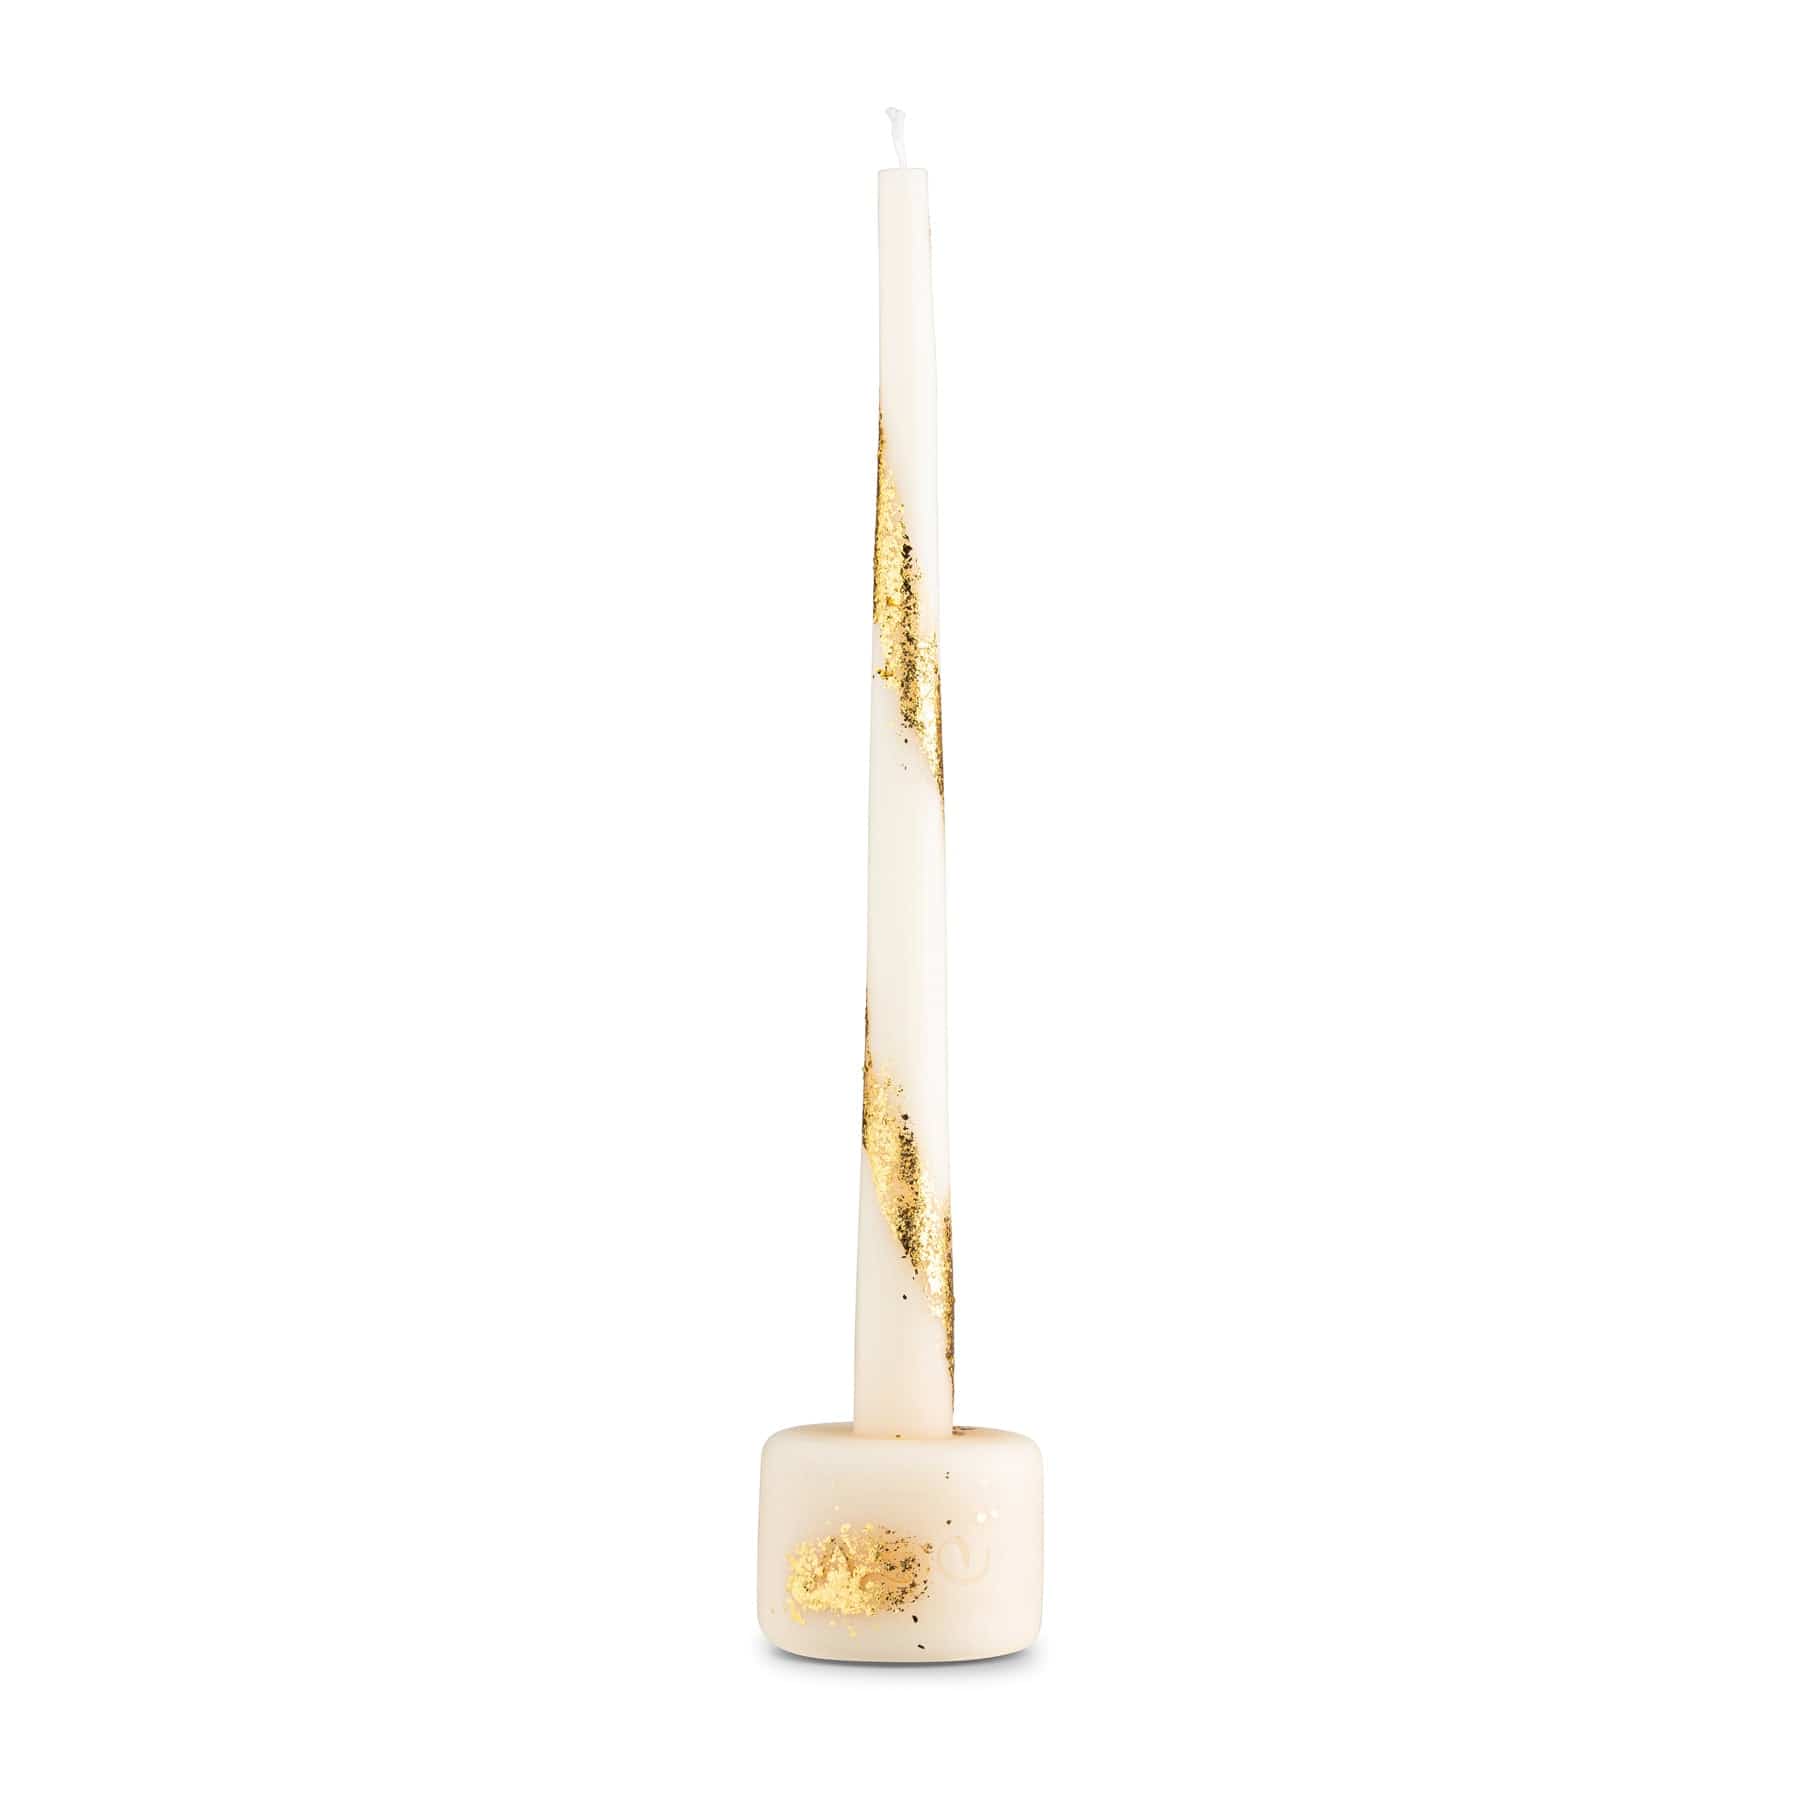 Shabbos Candle Lighter - Waterdale Collection